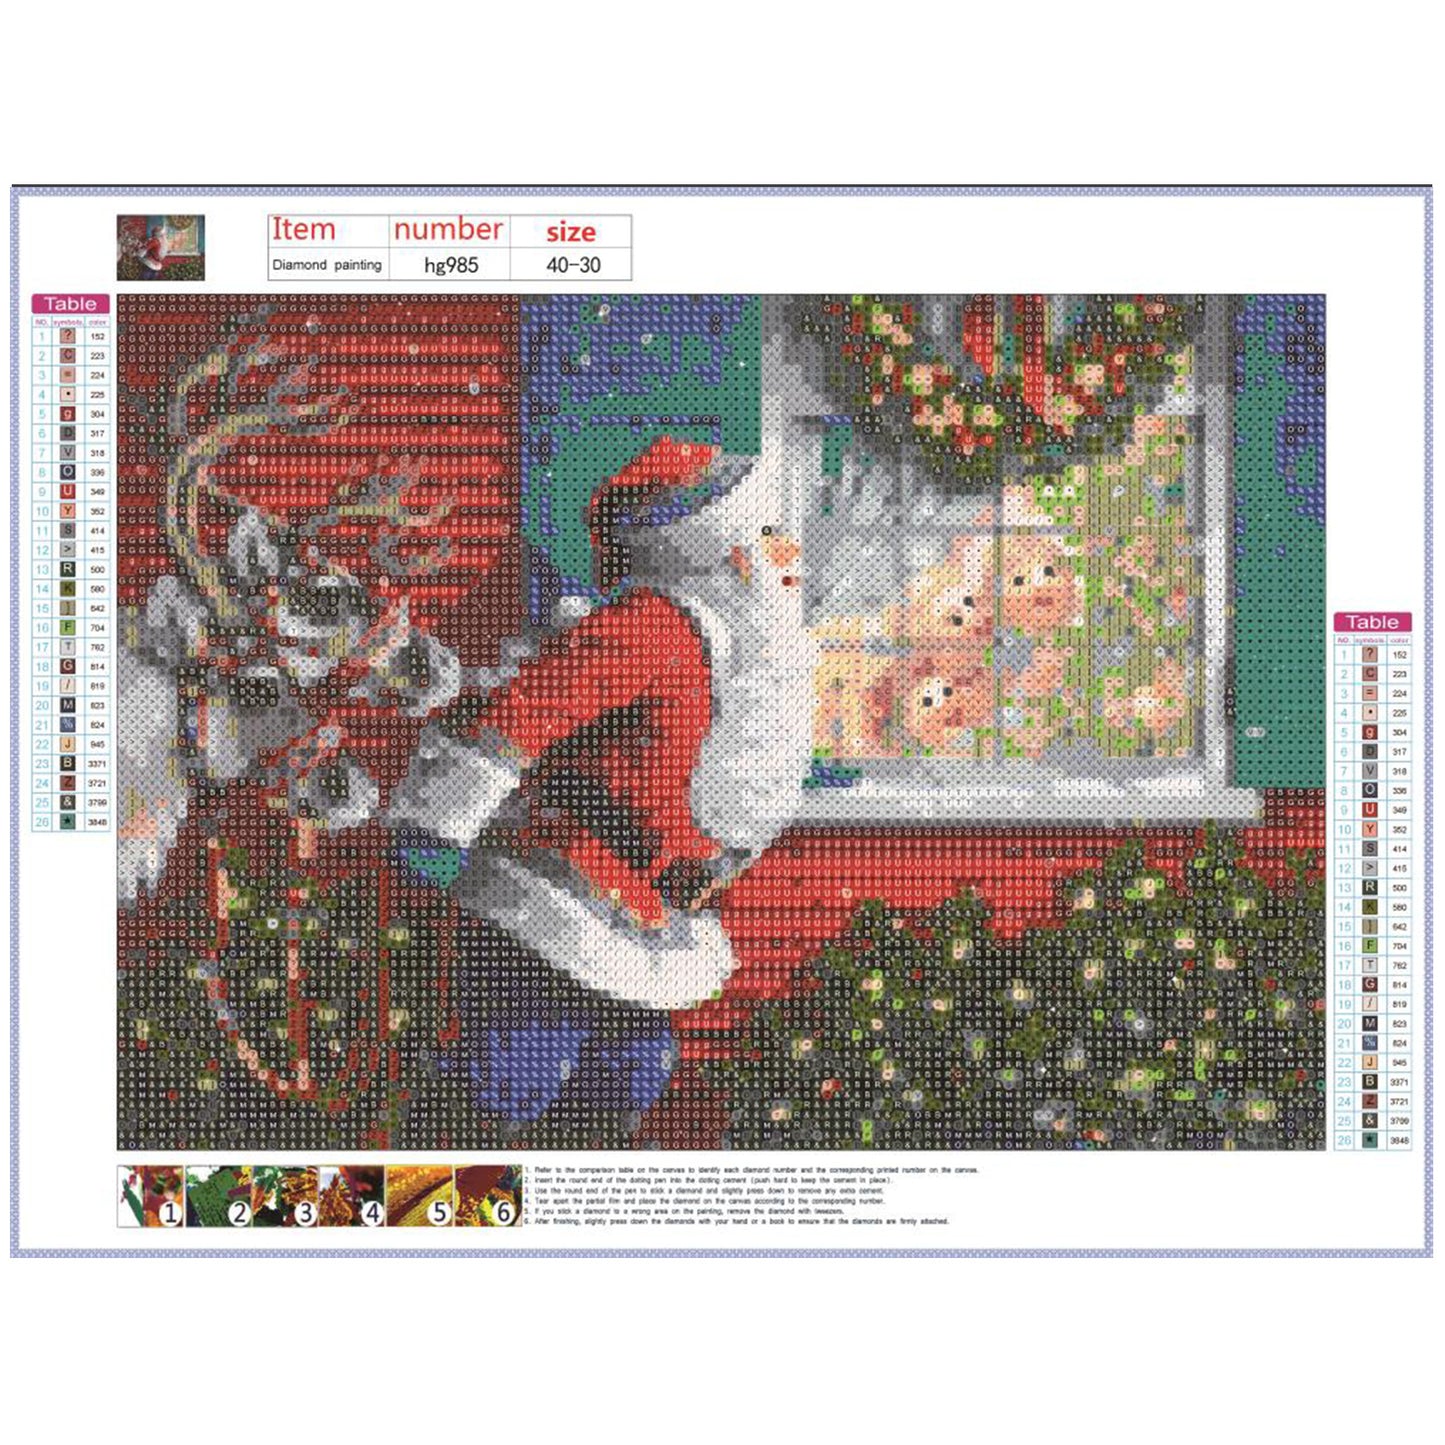 4 Sets Christmas Snowman 5D Full Drill Diamond Painting Embroidery for Cross Stitch Kits DIY for Rhinestone Crystal Home Decoration